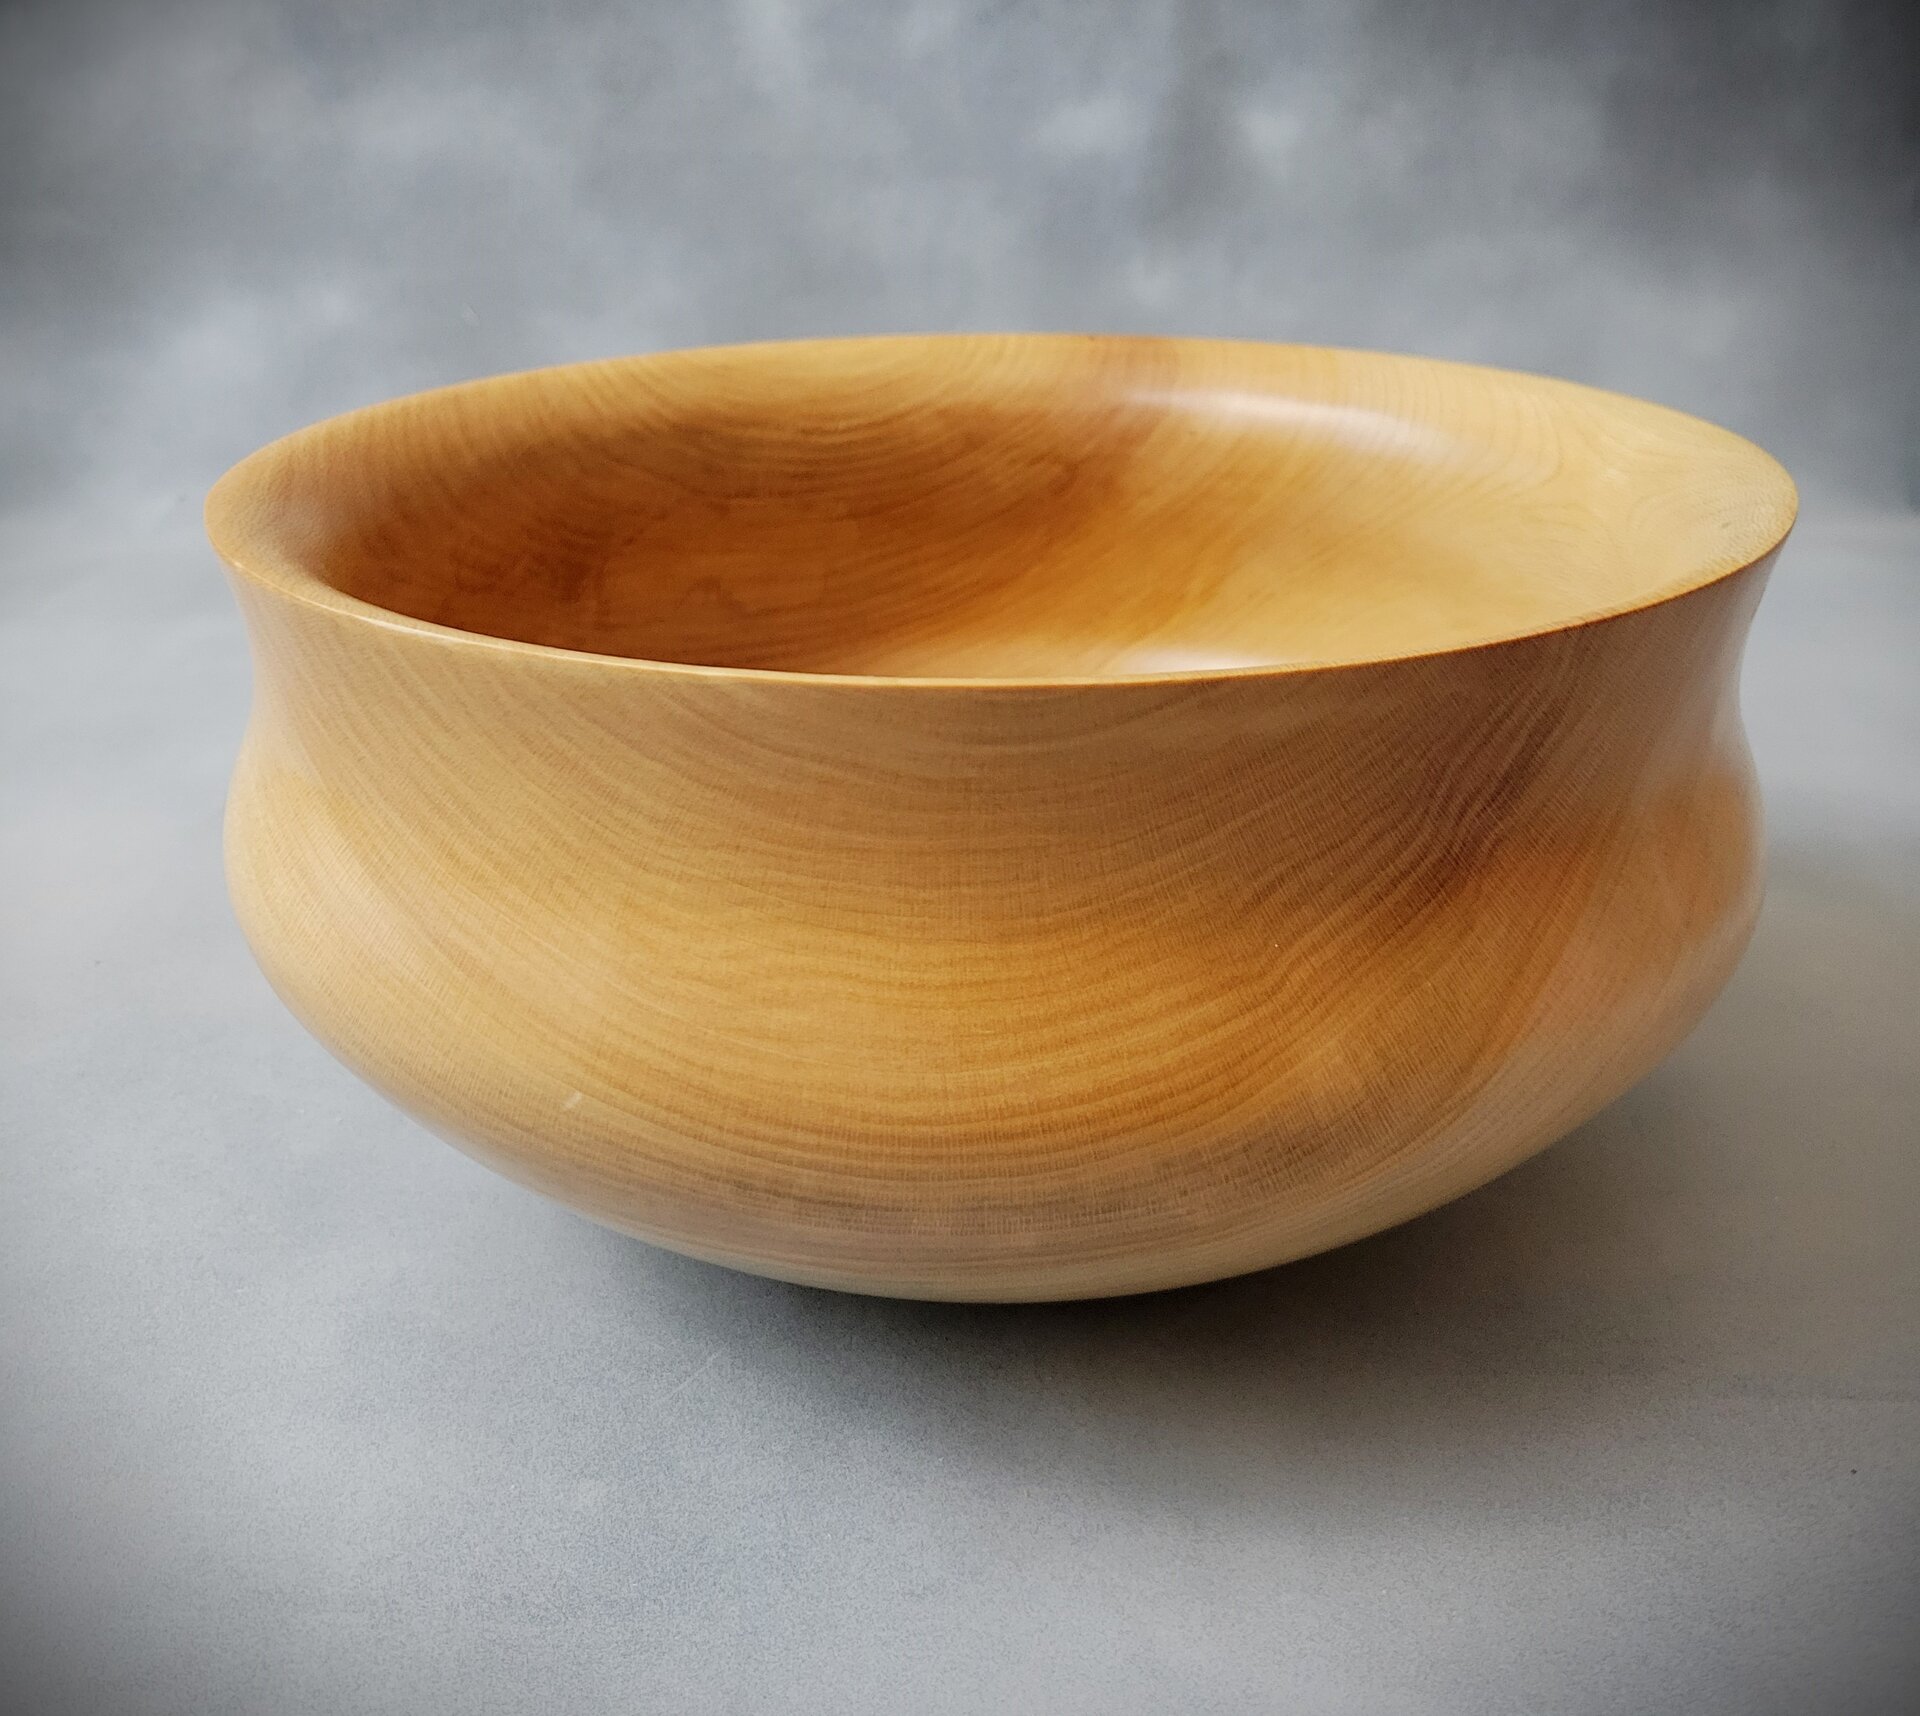 Sycamore necked bowl